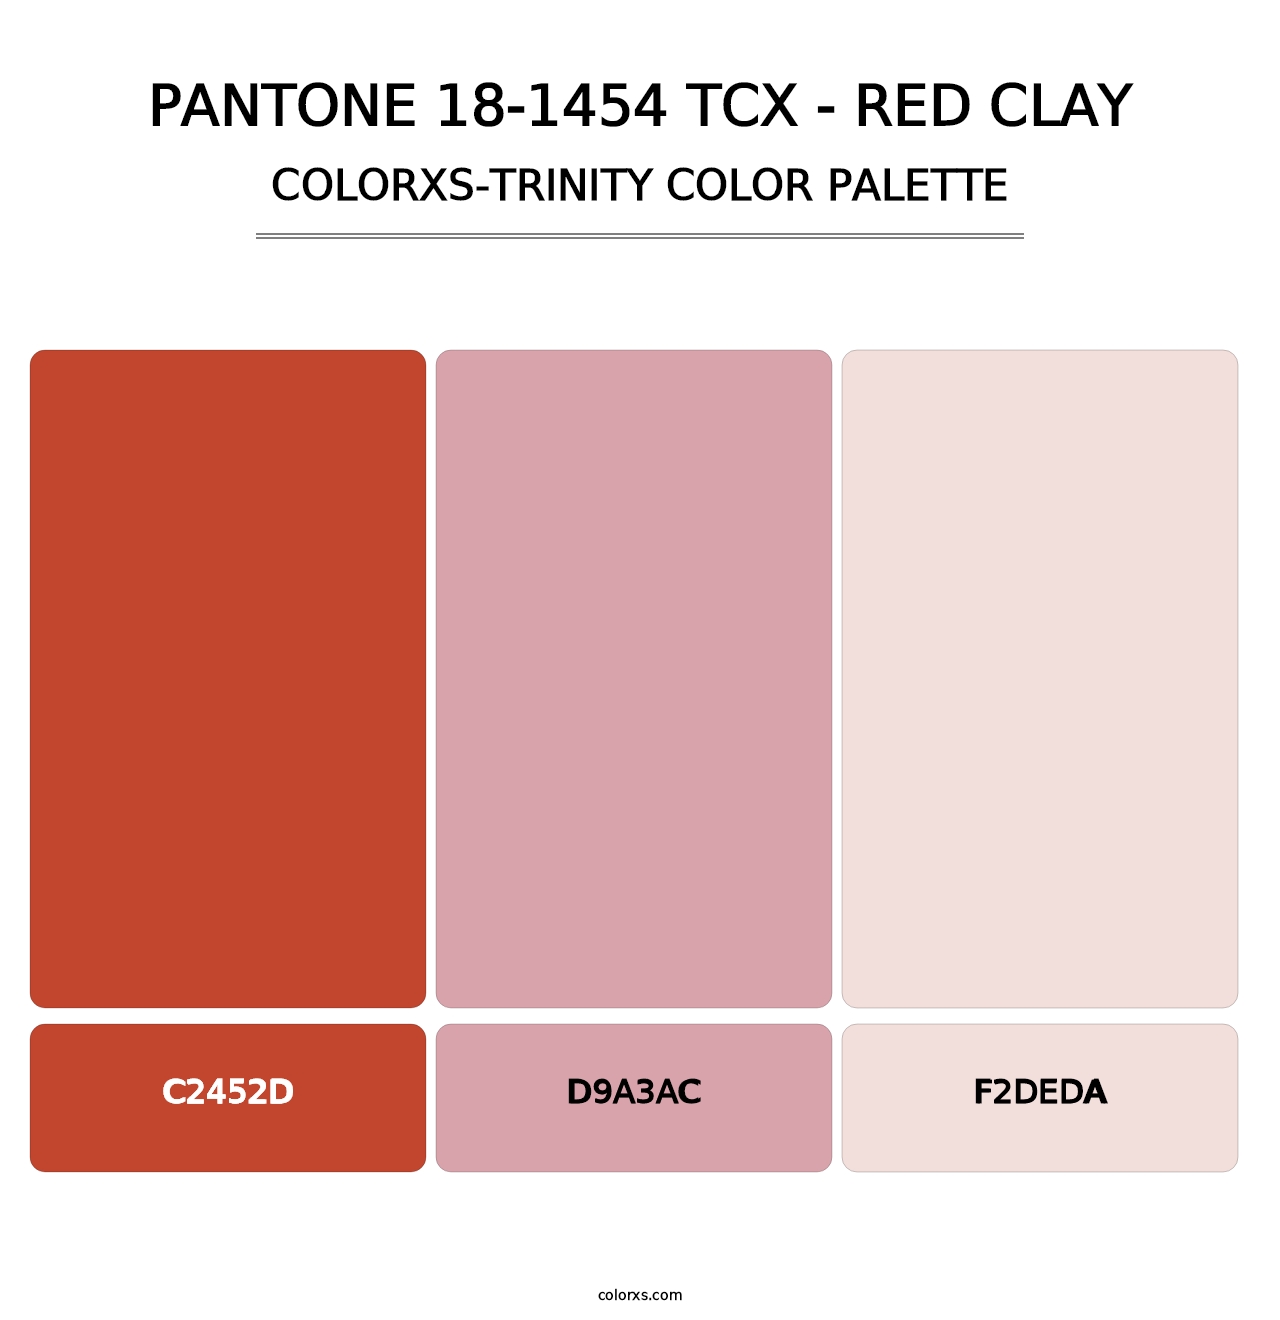 PANTONE 18-1454 TCX - Red Clay - Colorxs Trinity Palette